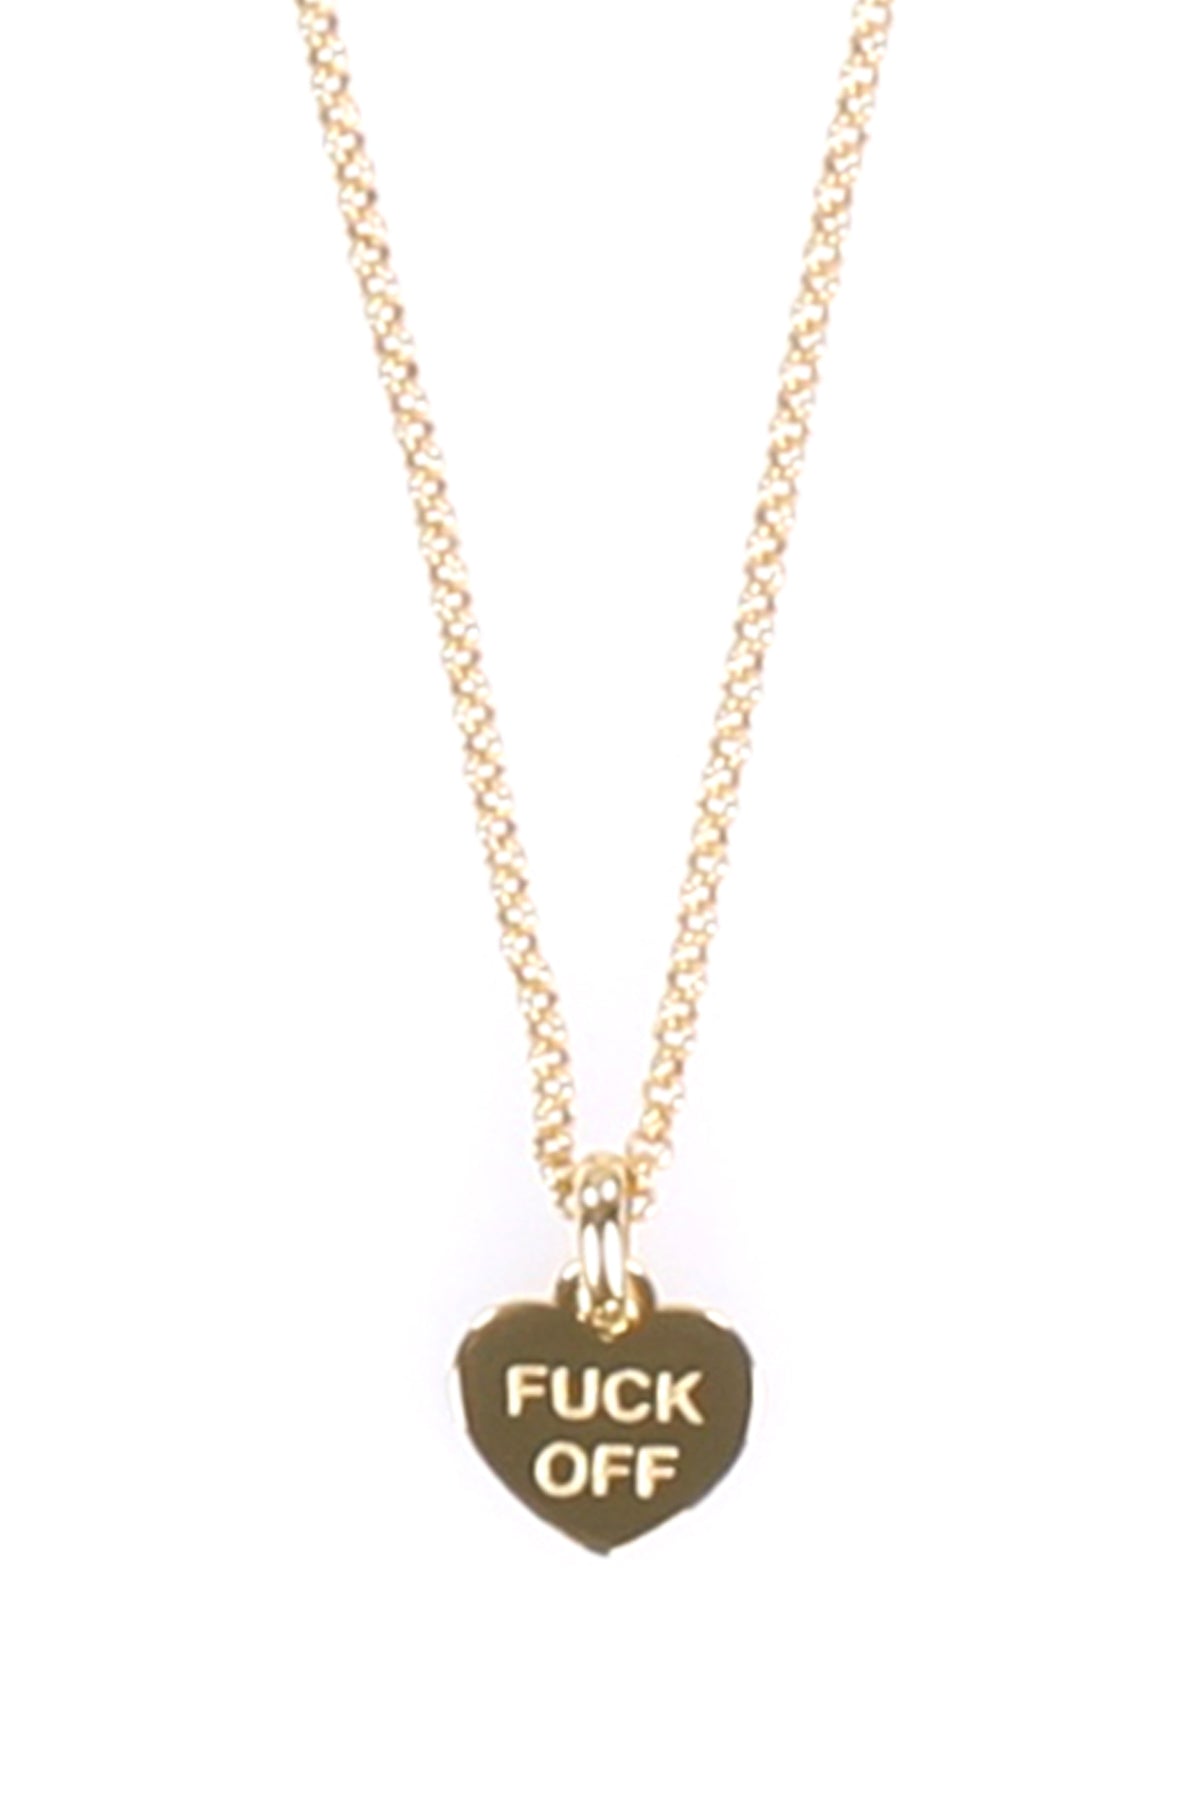 FUCK OFF NECKLESS / GOLD